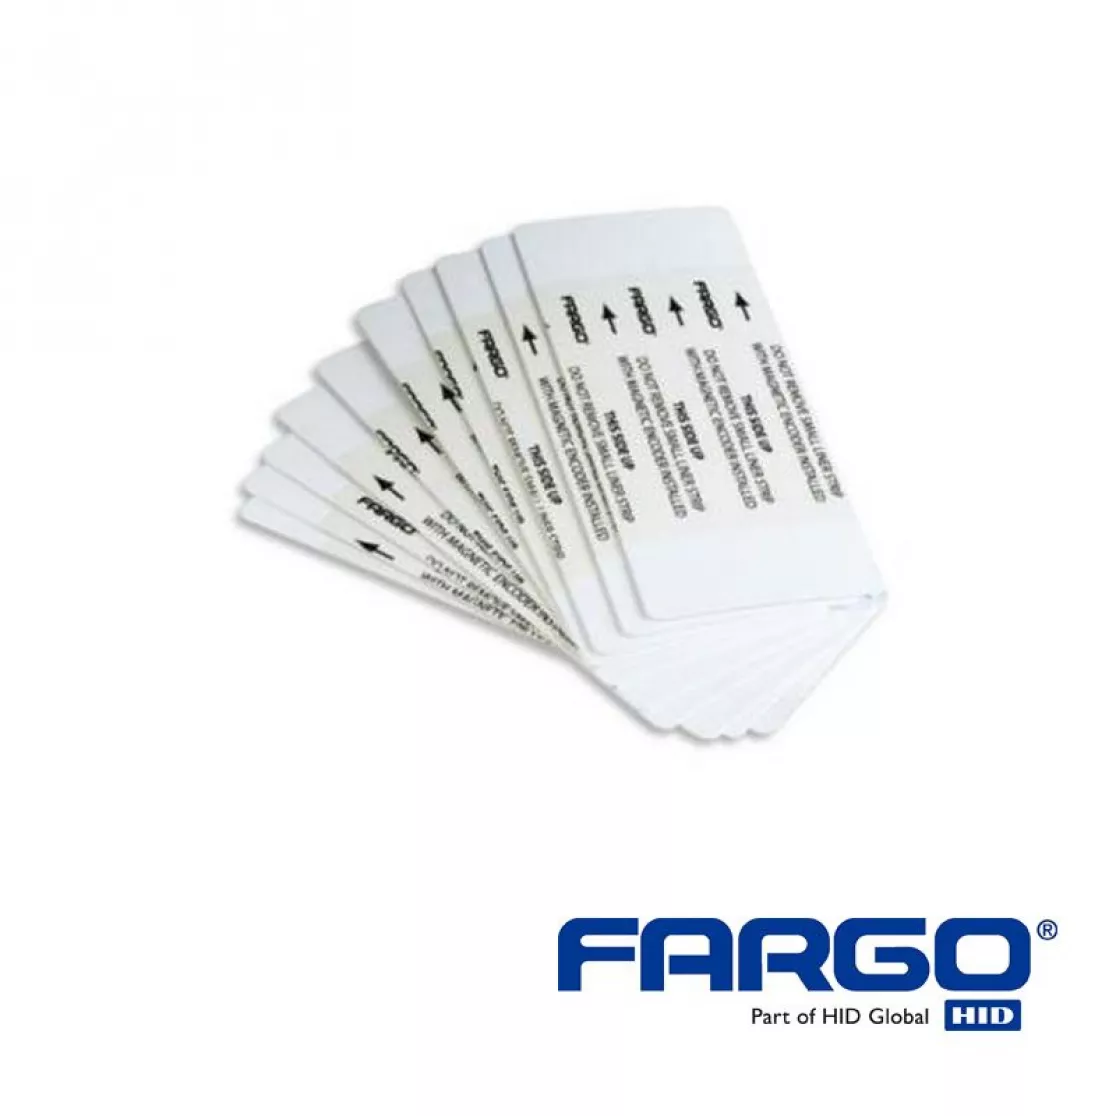 Iso-Propyl Cleaning cards double-sided for hid fargo DTC4500e card printer